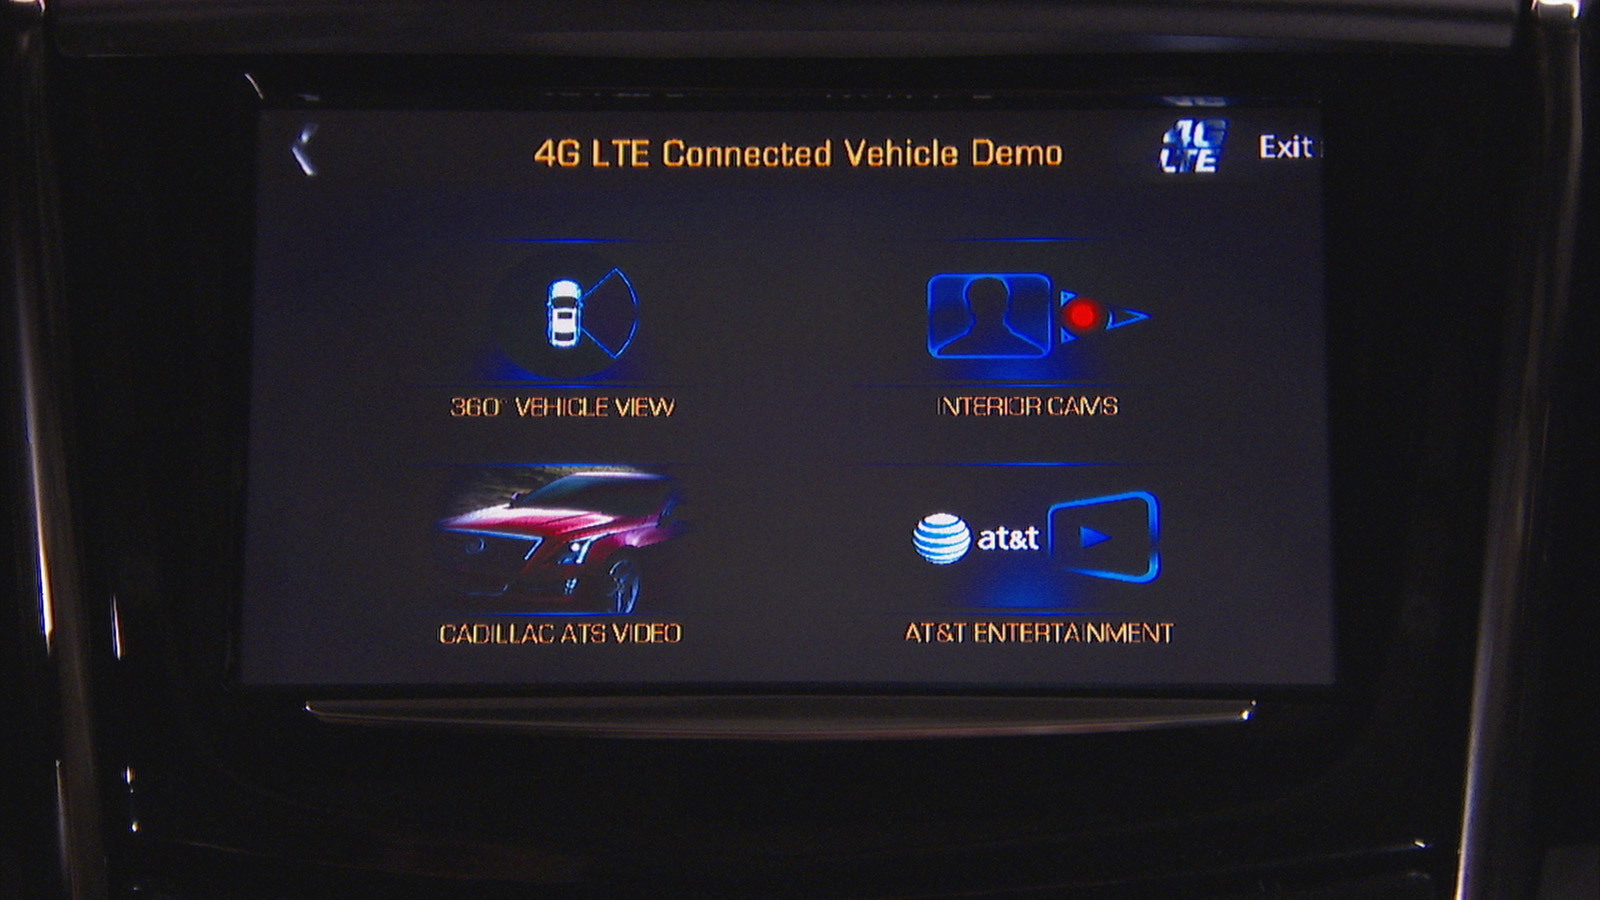 Most GM models will offer 4G LTE mobile broadband from 2014 onwards